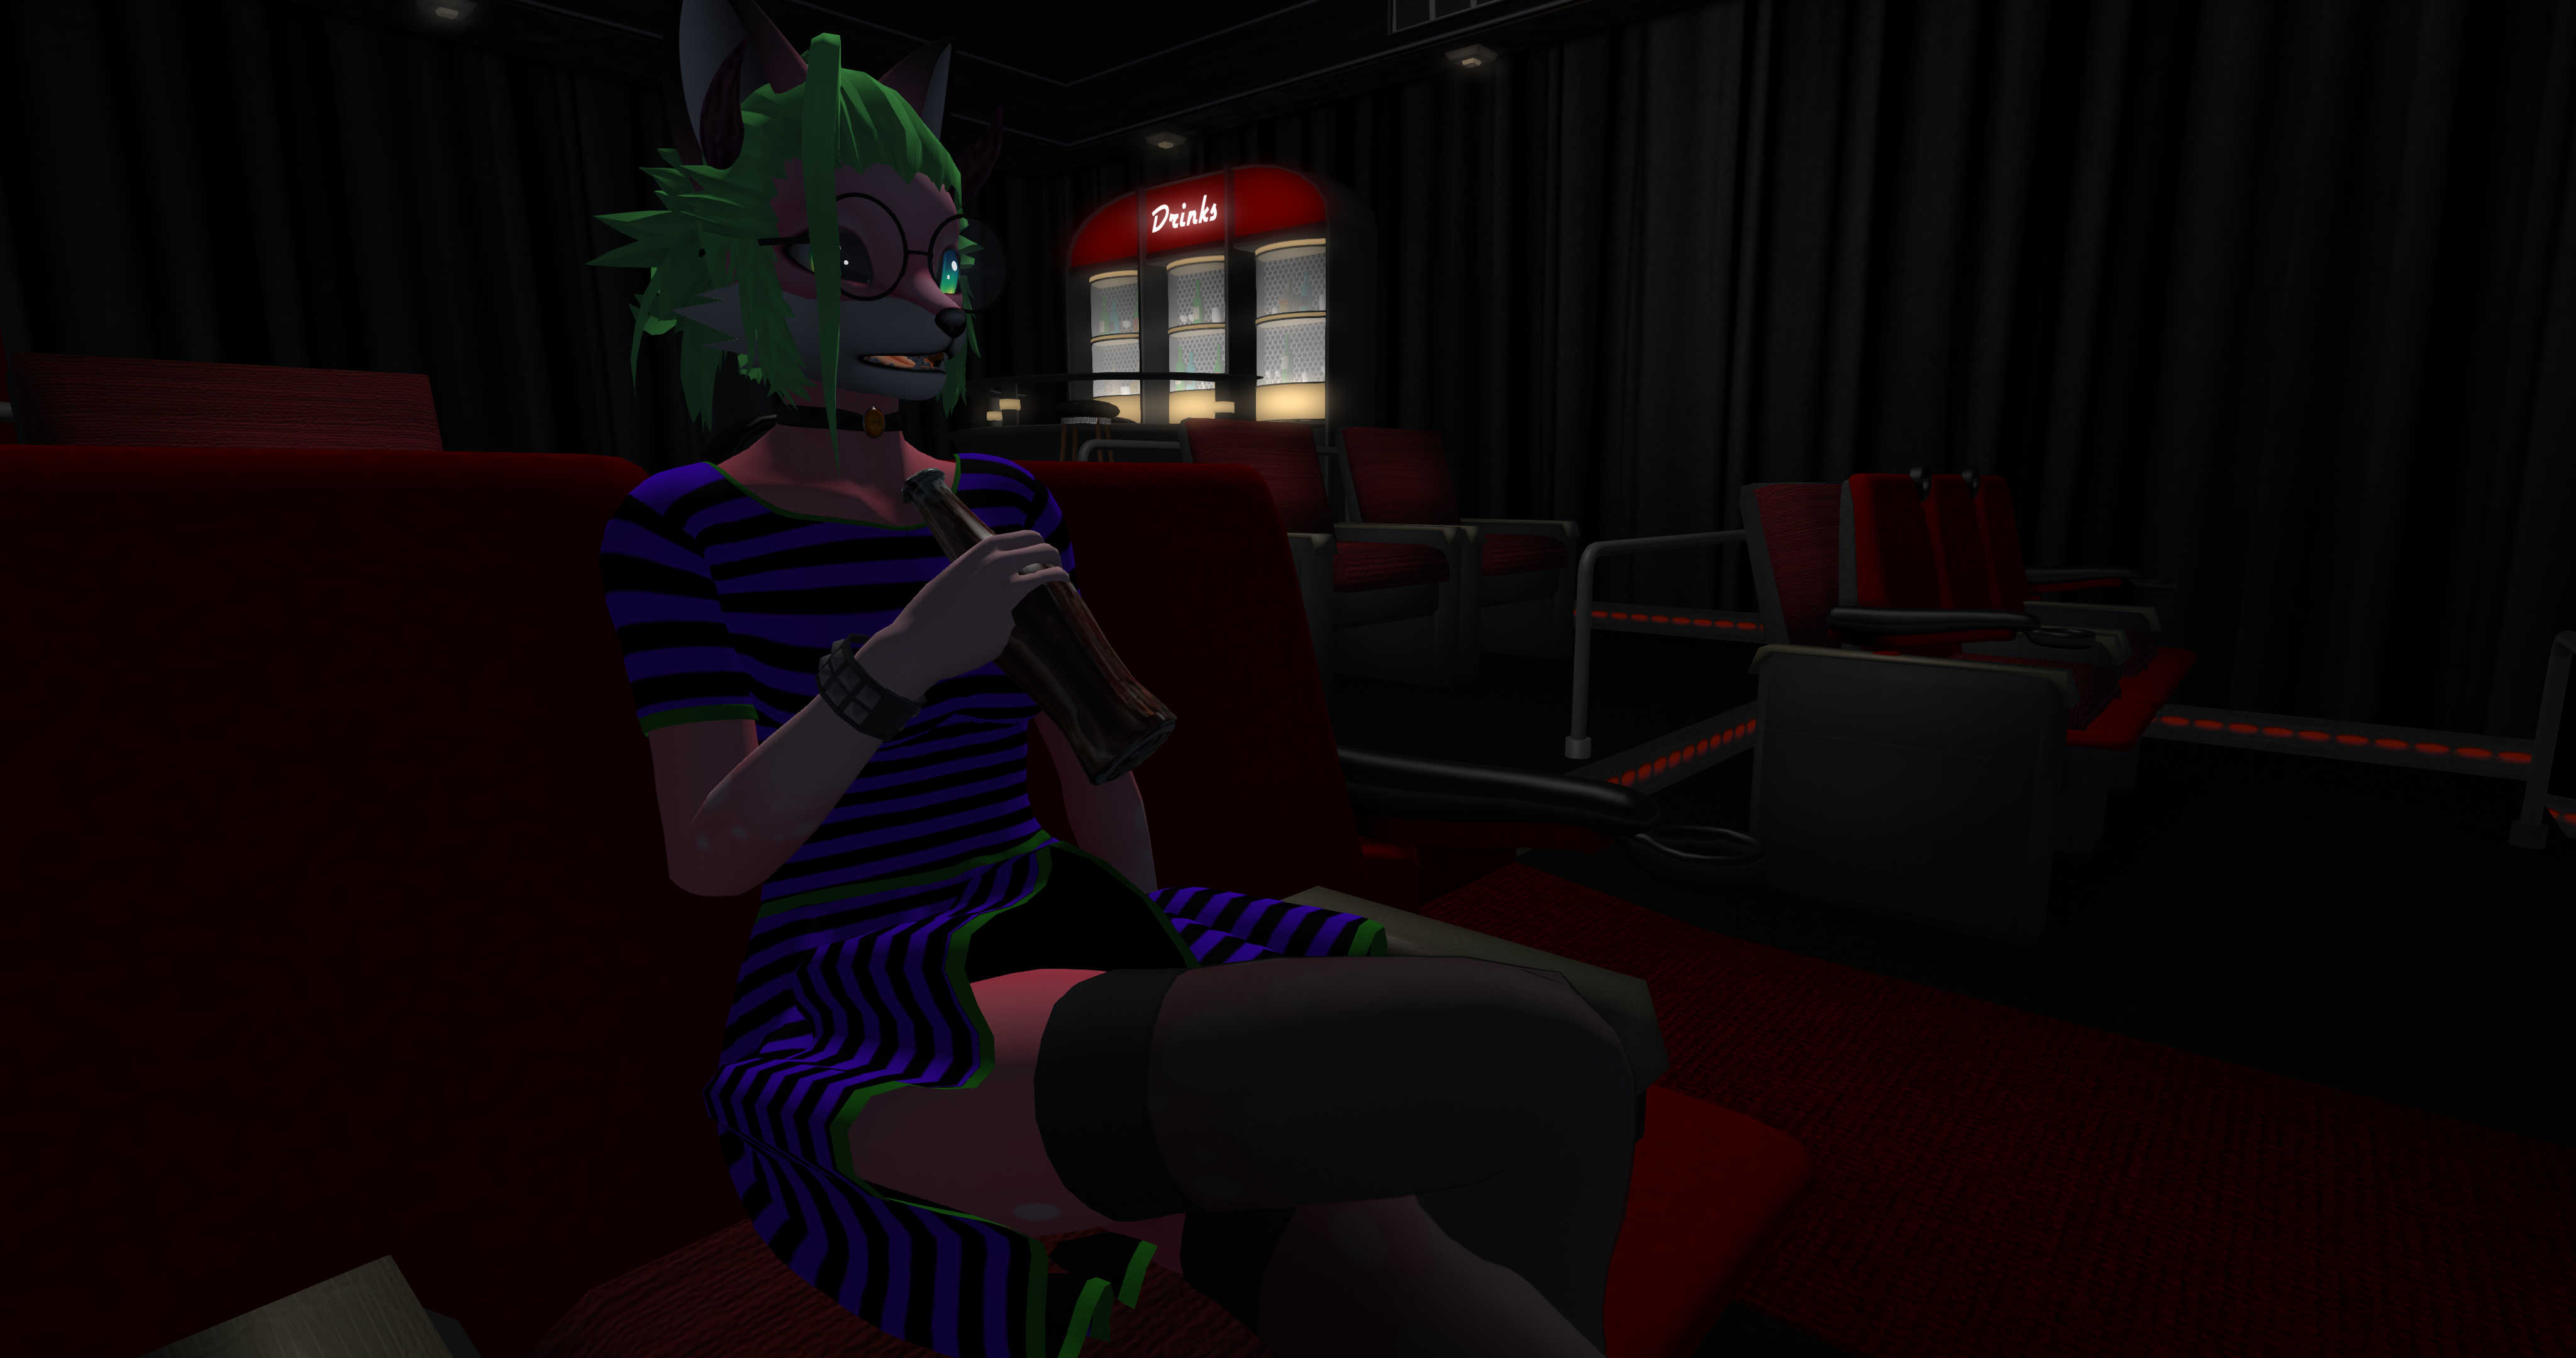 Seeing a Movie - South Swan Sea (230,250,27)